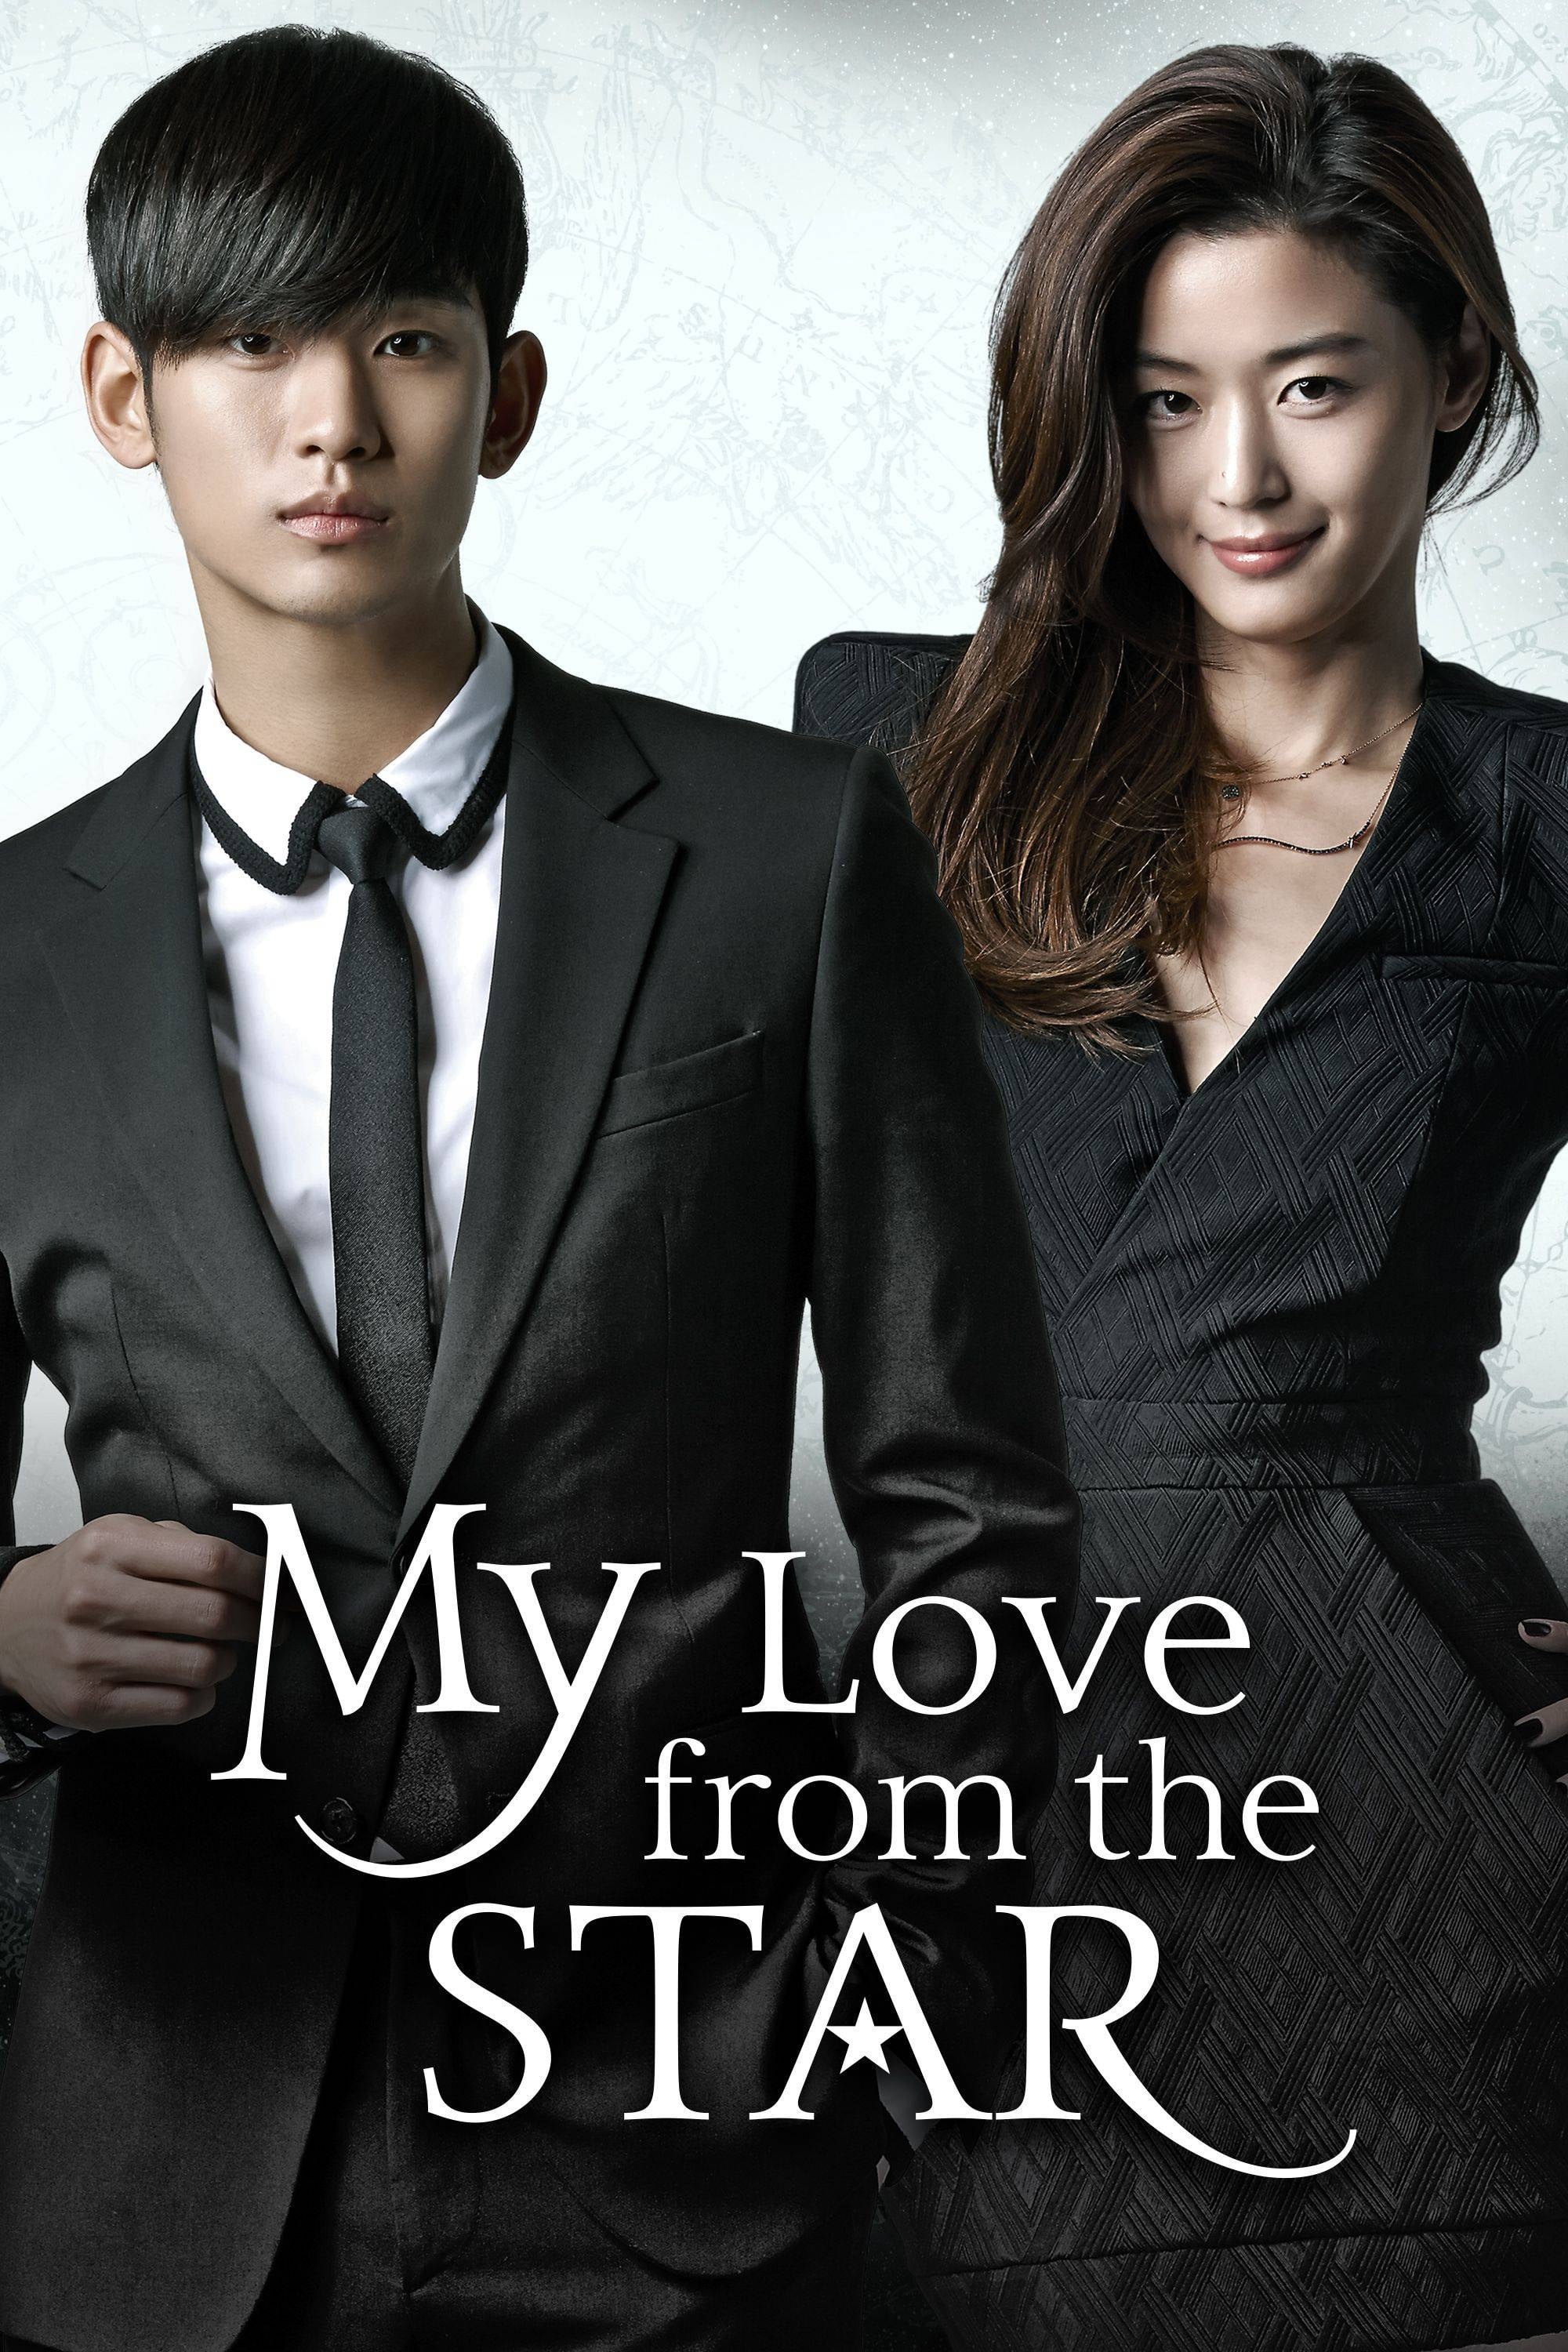 My Love From Another Star (2013)